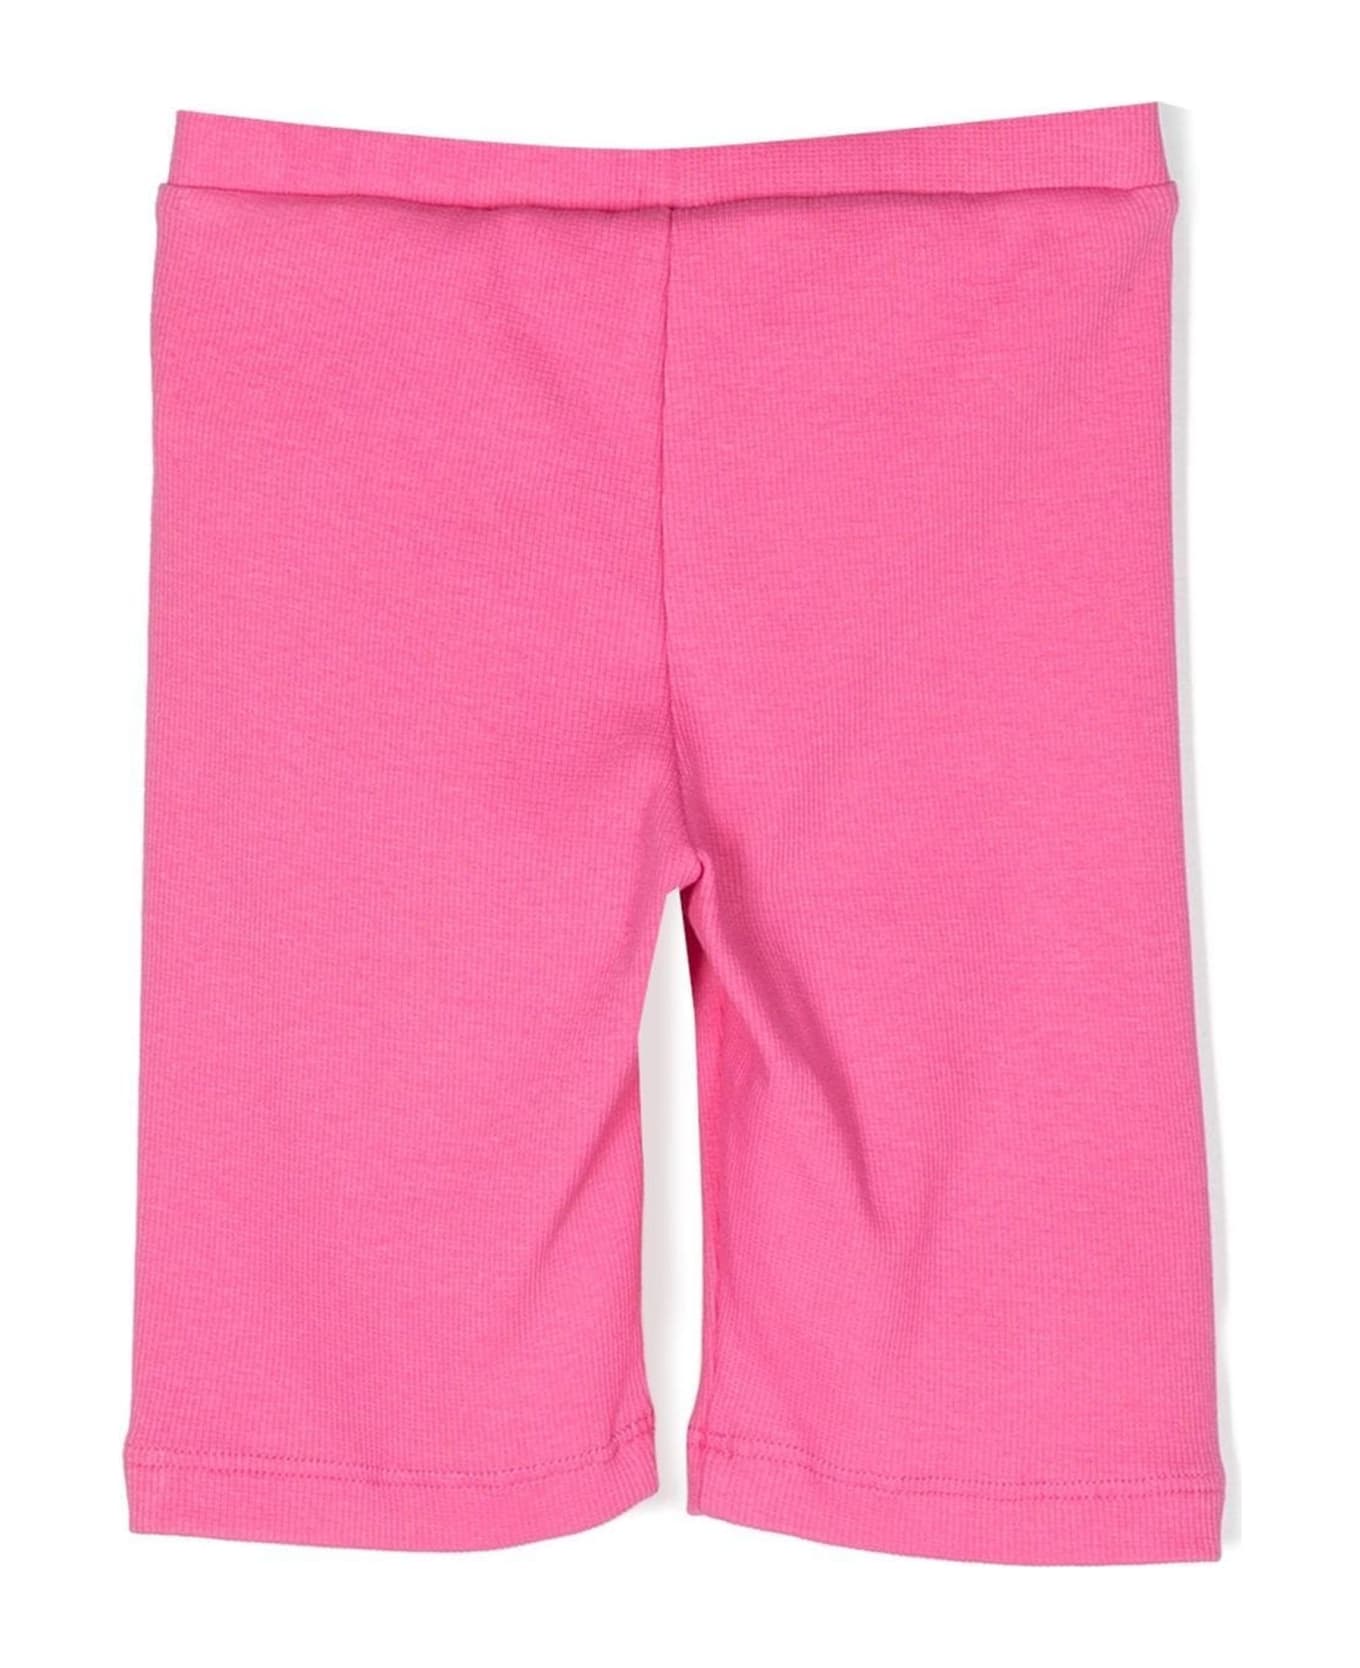 Off-White Pink Cotton Shorts - FUXIA ボトムス